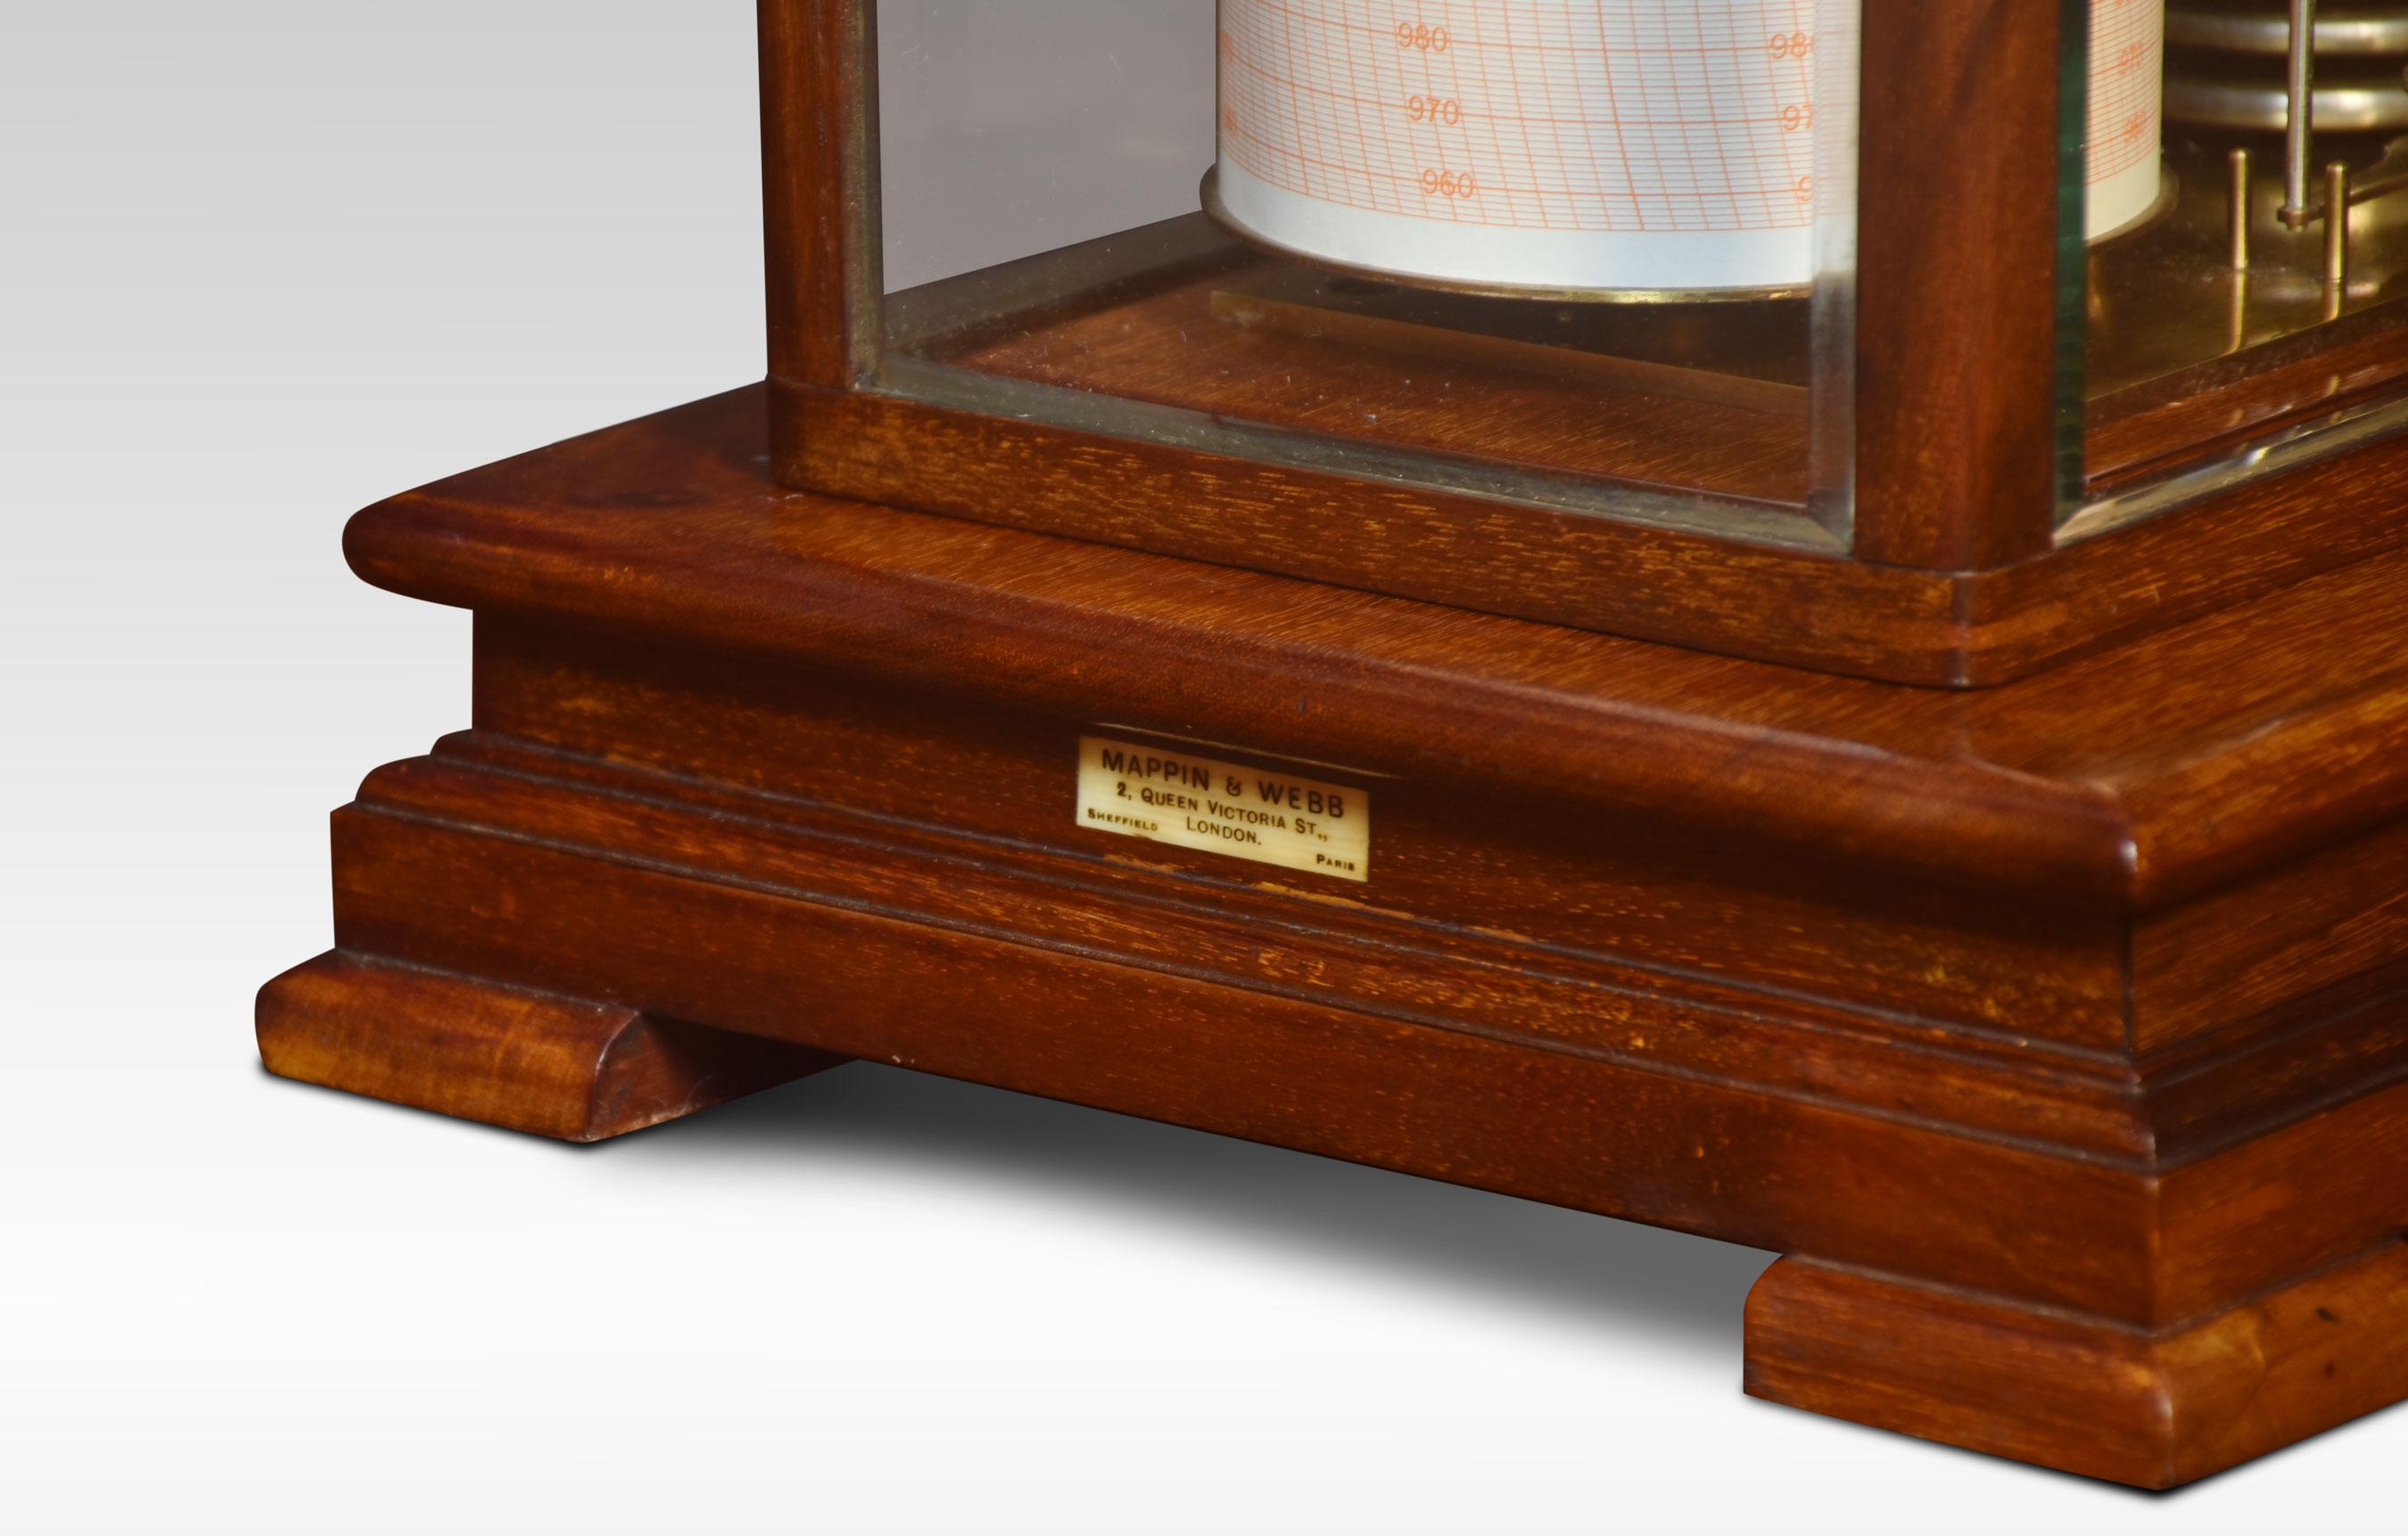 Mappin Webb walnut-cased Barograph, having five beveled glazed removable lid, and a drawer below to house the charts. The mechanical eight-day movement is housed in the drum, fitted with a seven-day chart that covers one full rotation of the drum.